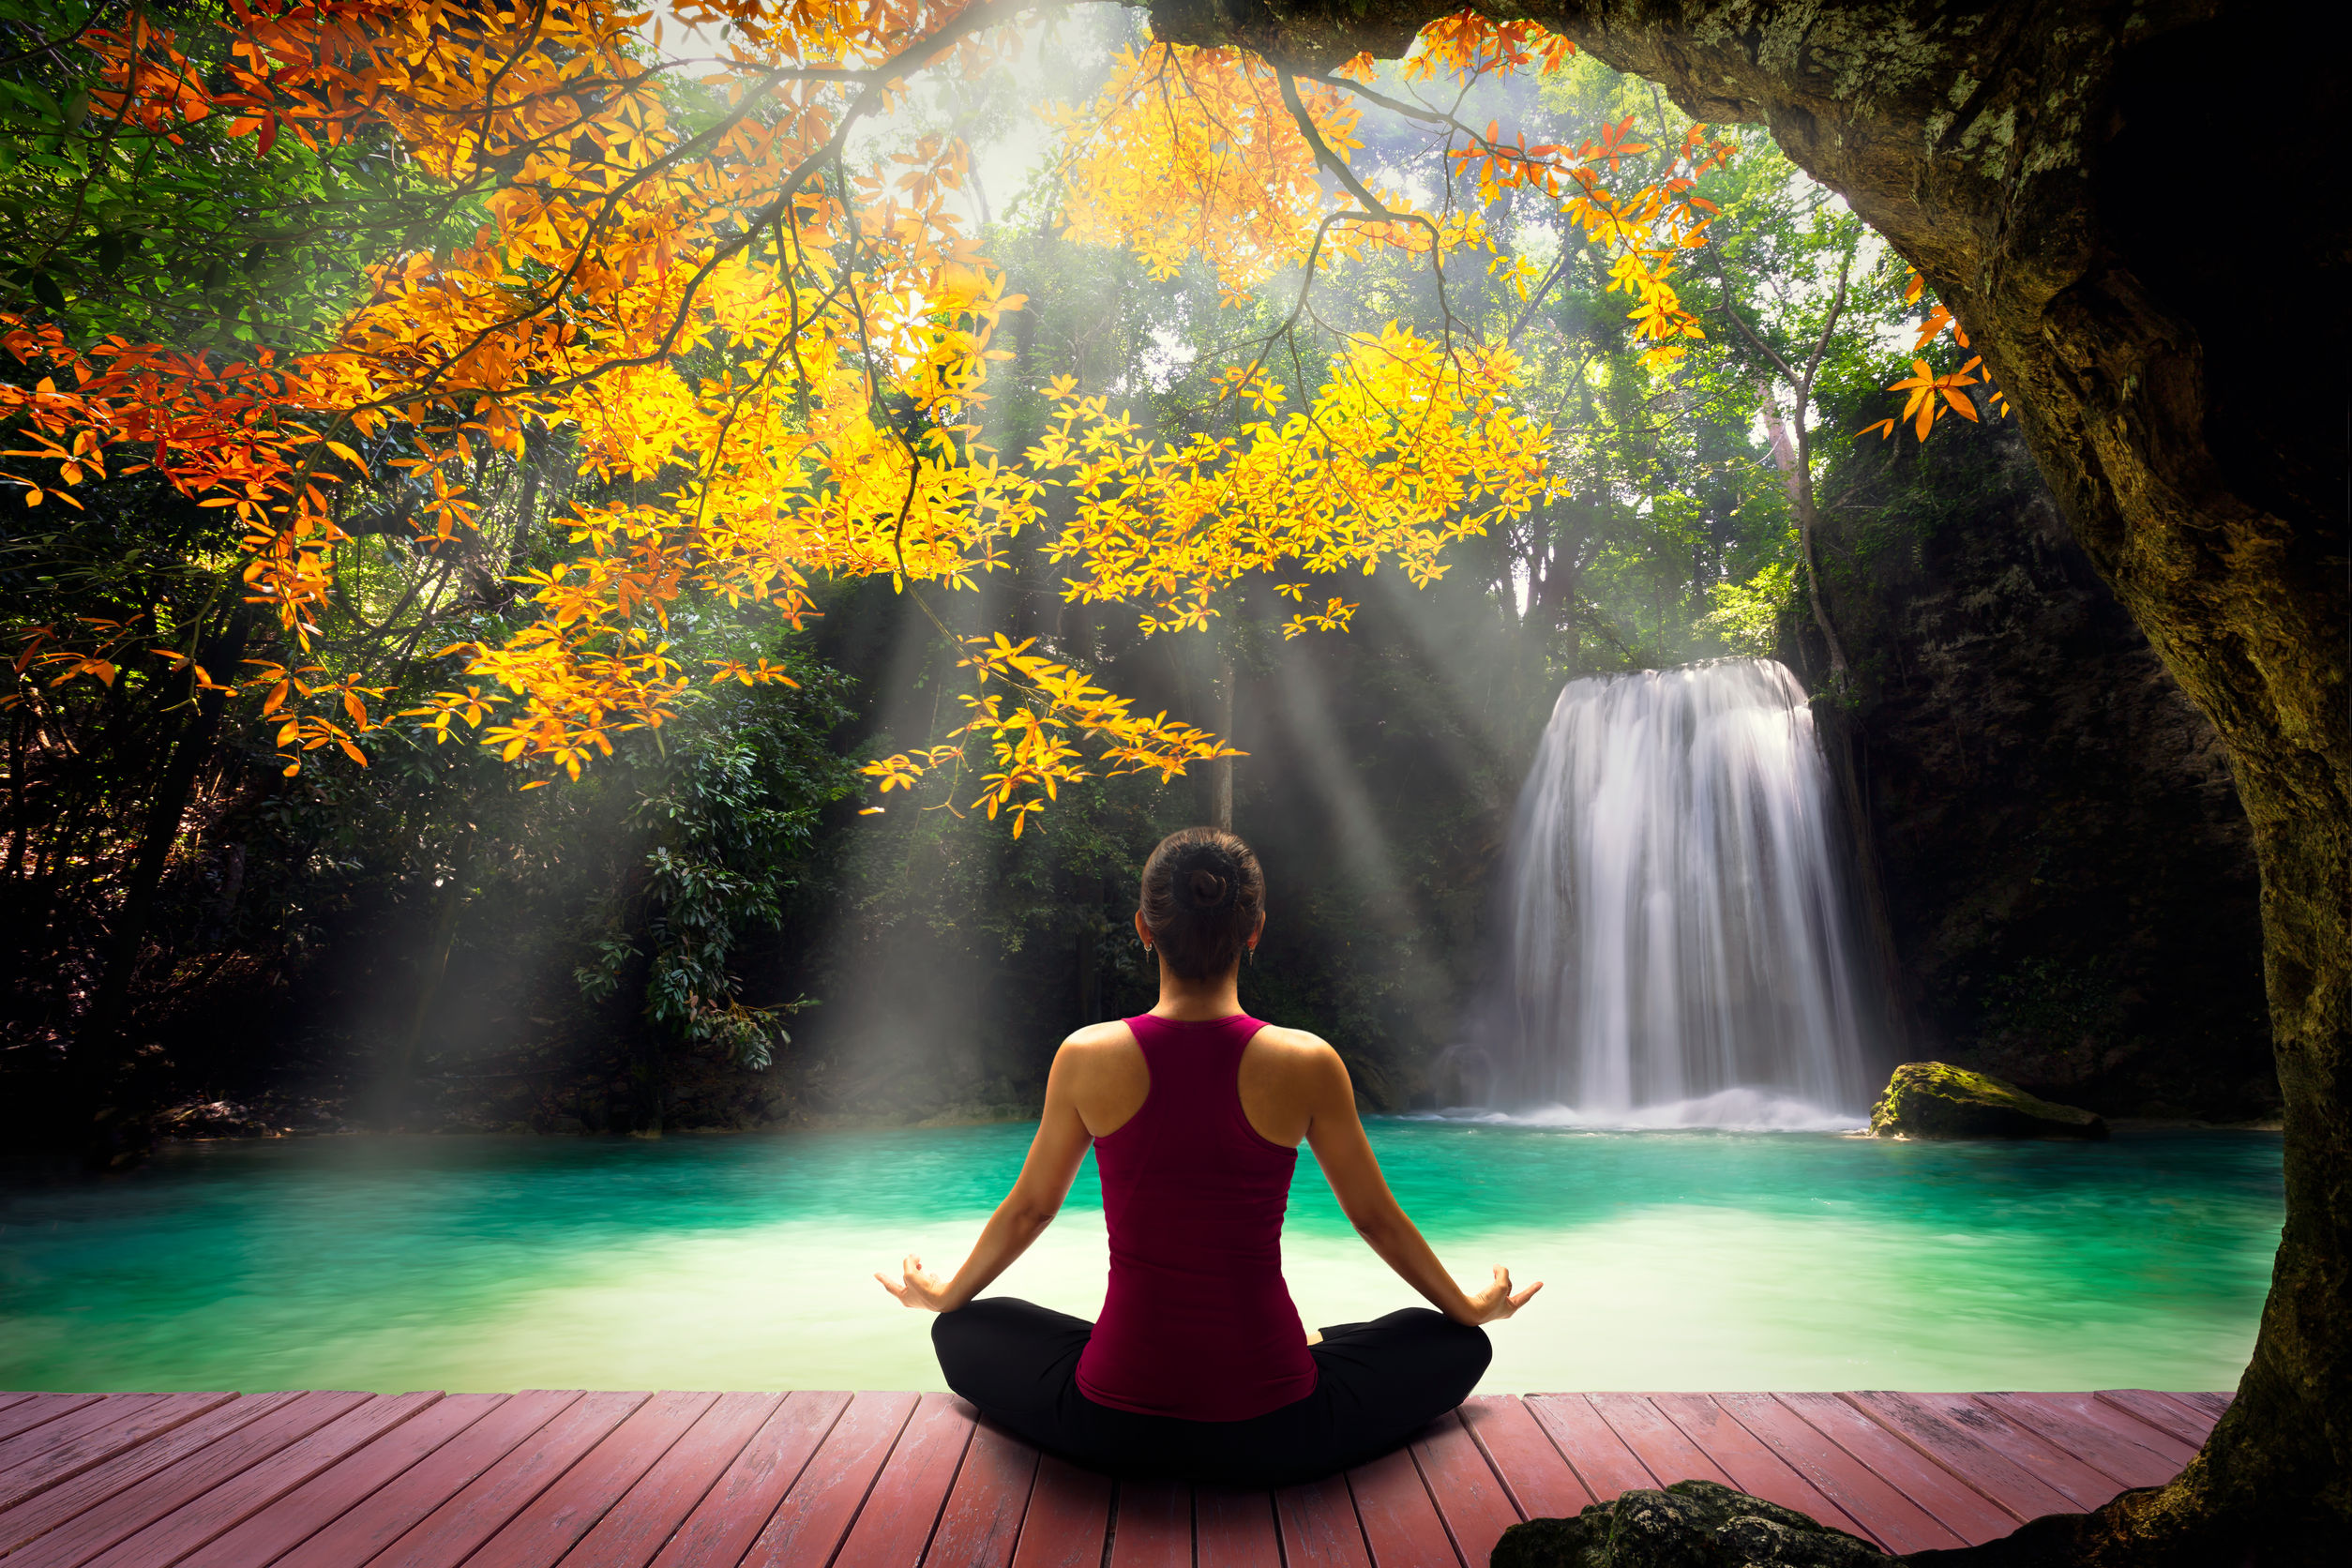 41619177 – young woman in yoga pose sitting near watefall rear view